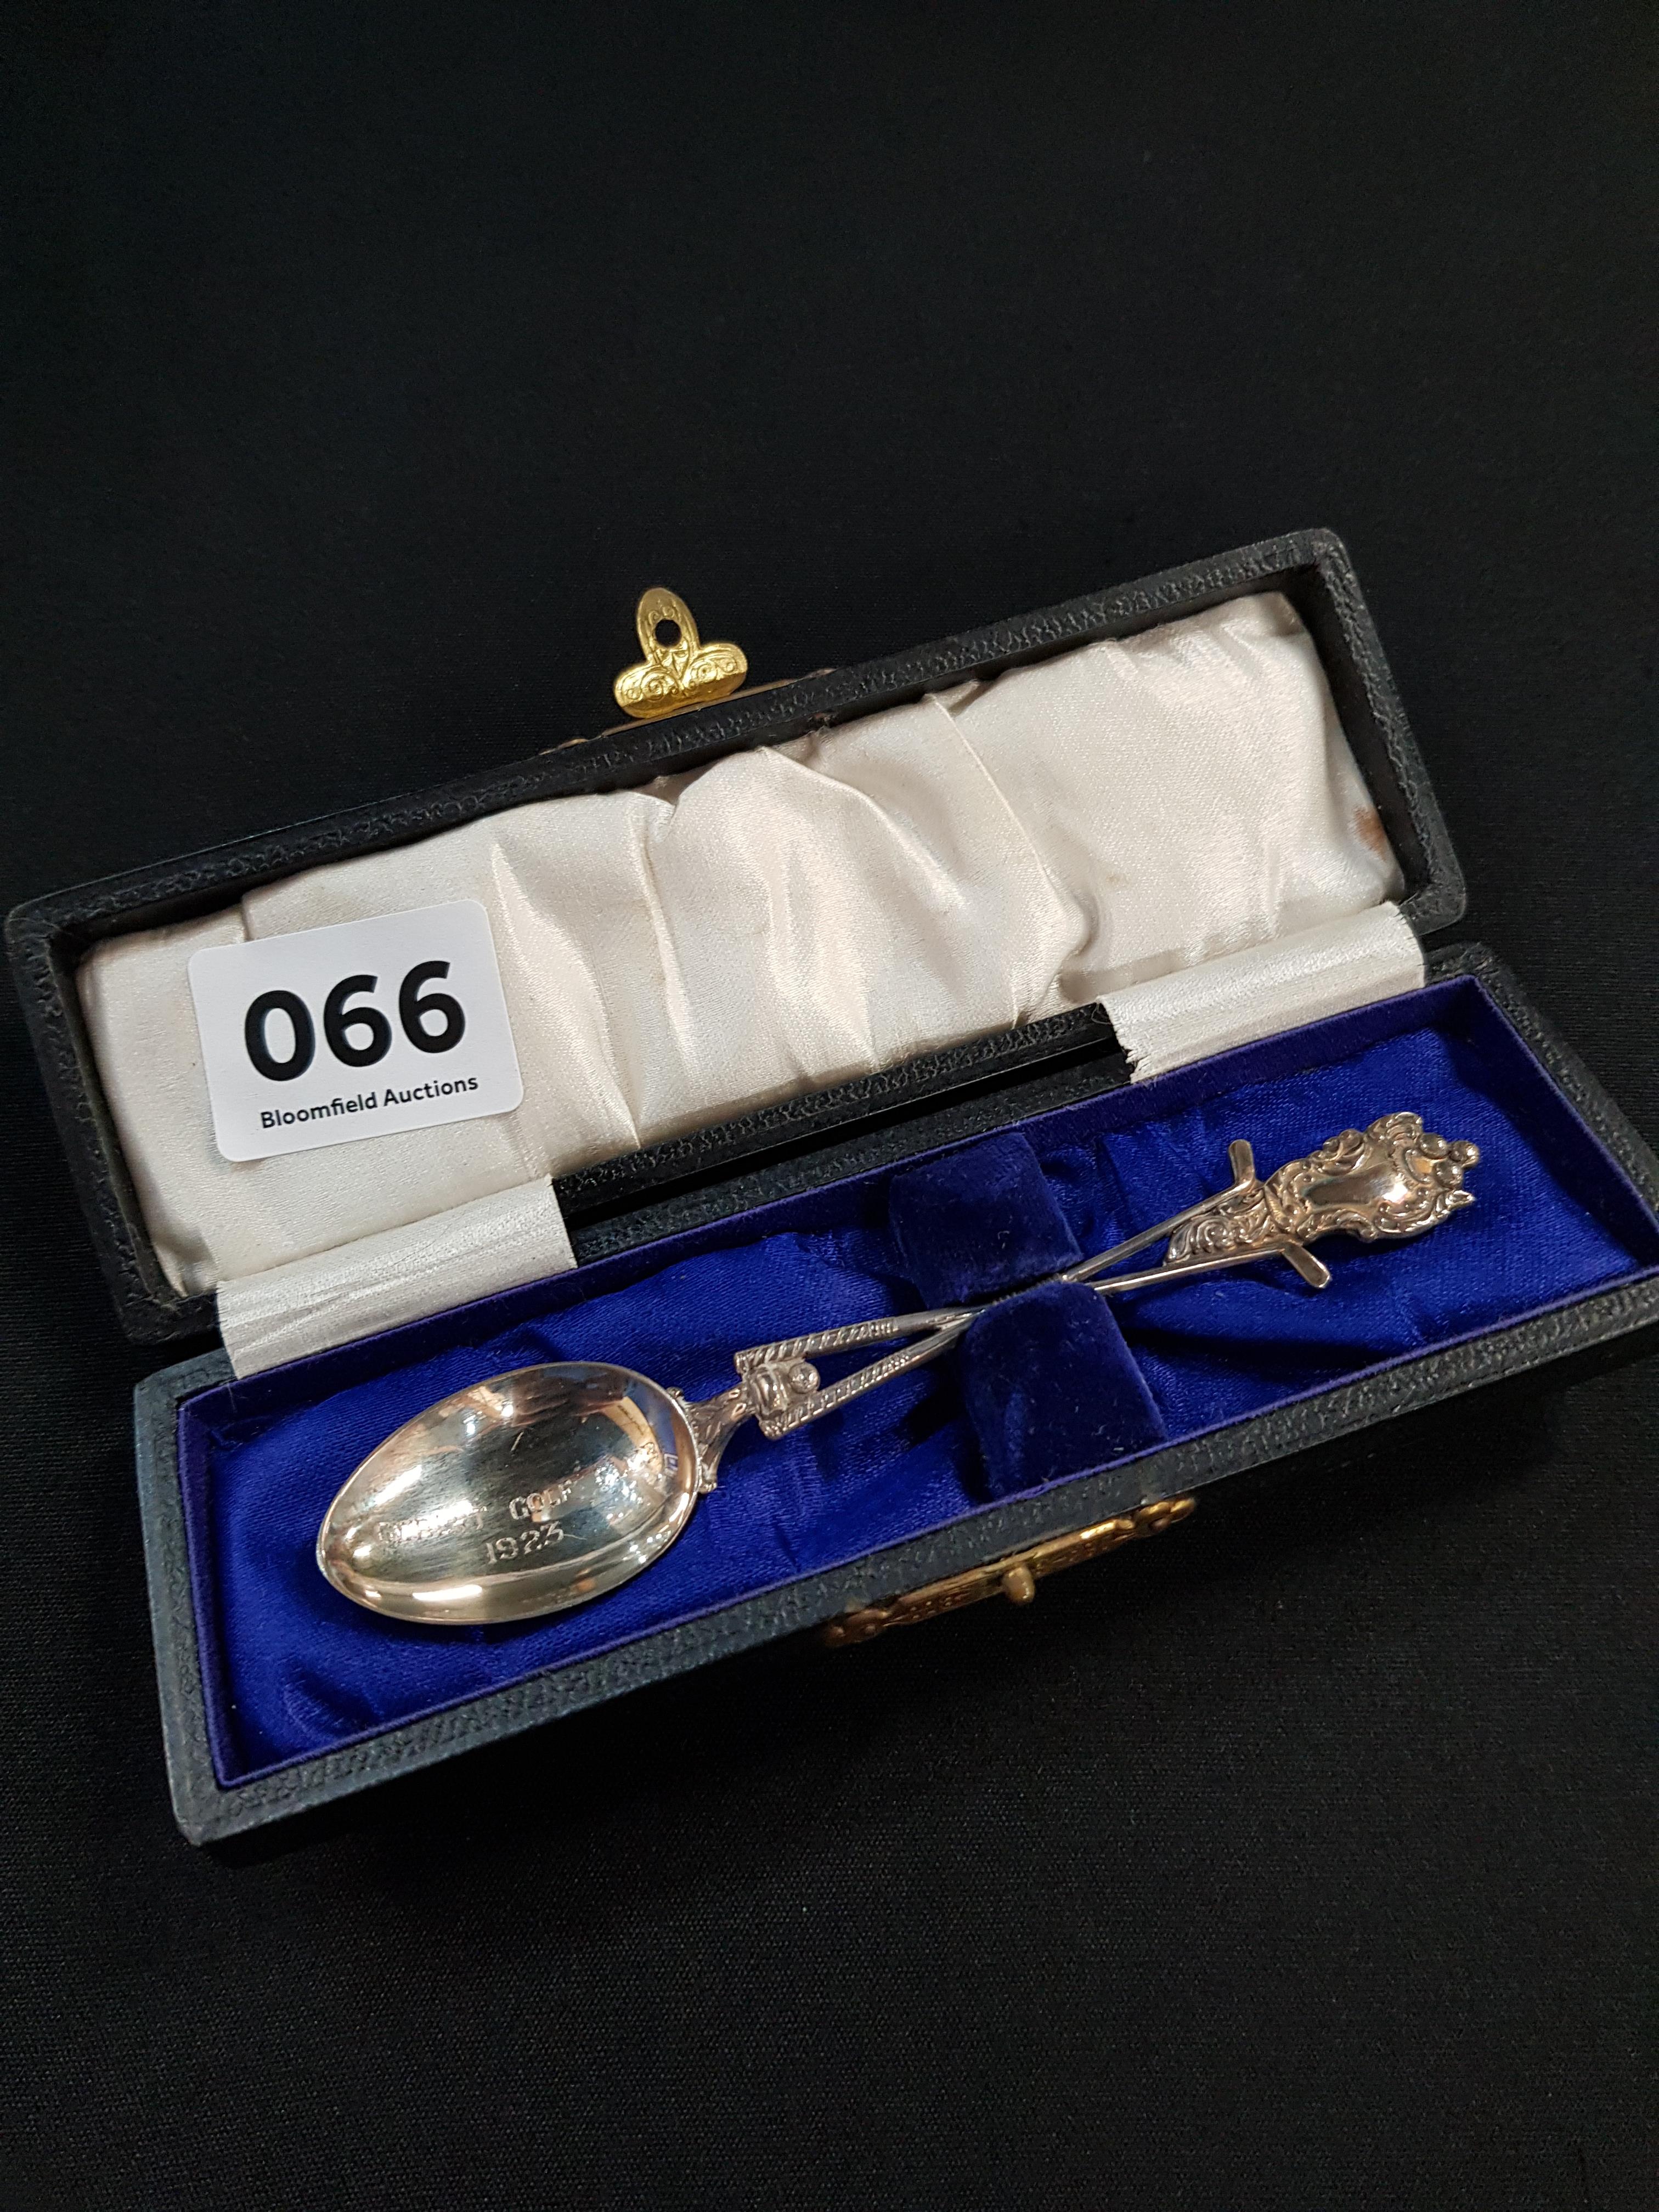 ANTIQUE CASED SILVER GOLFING SPOON